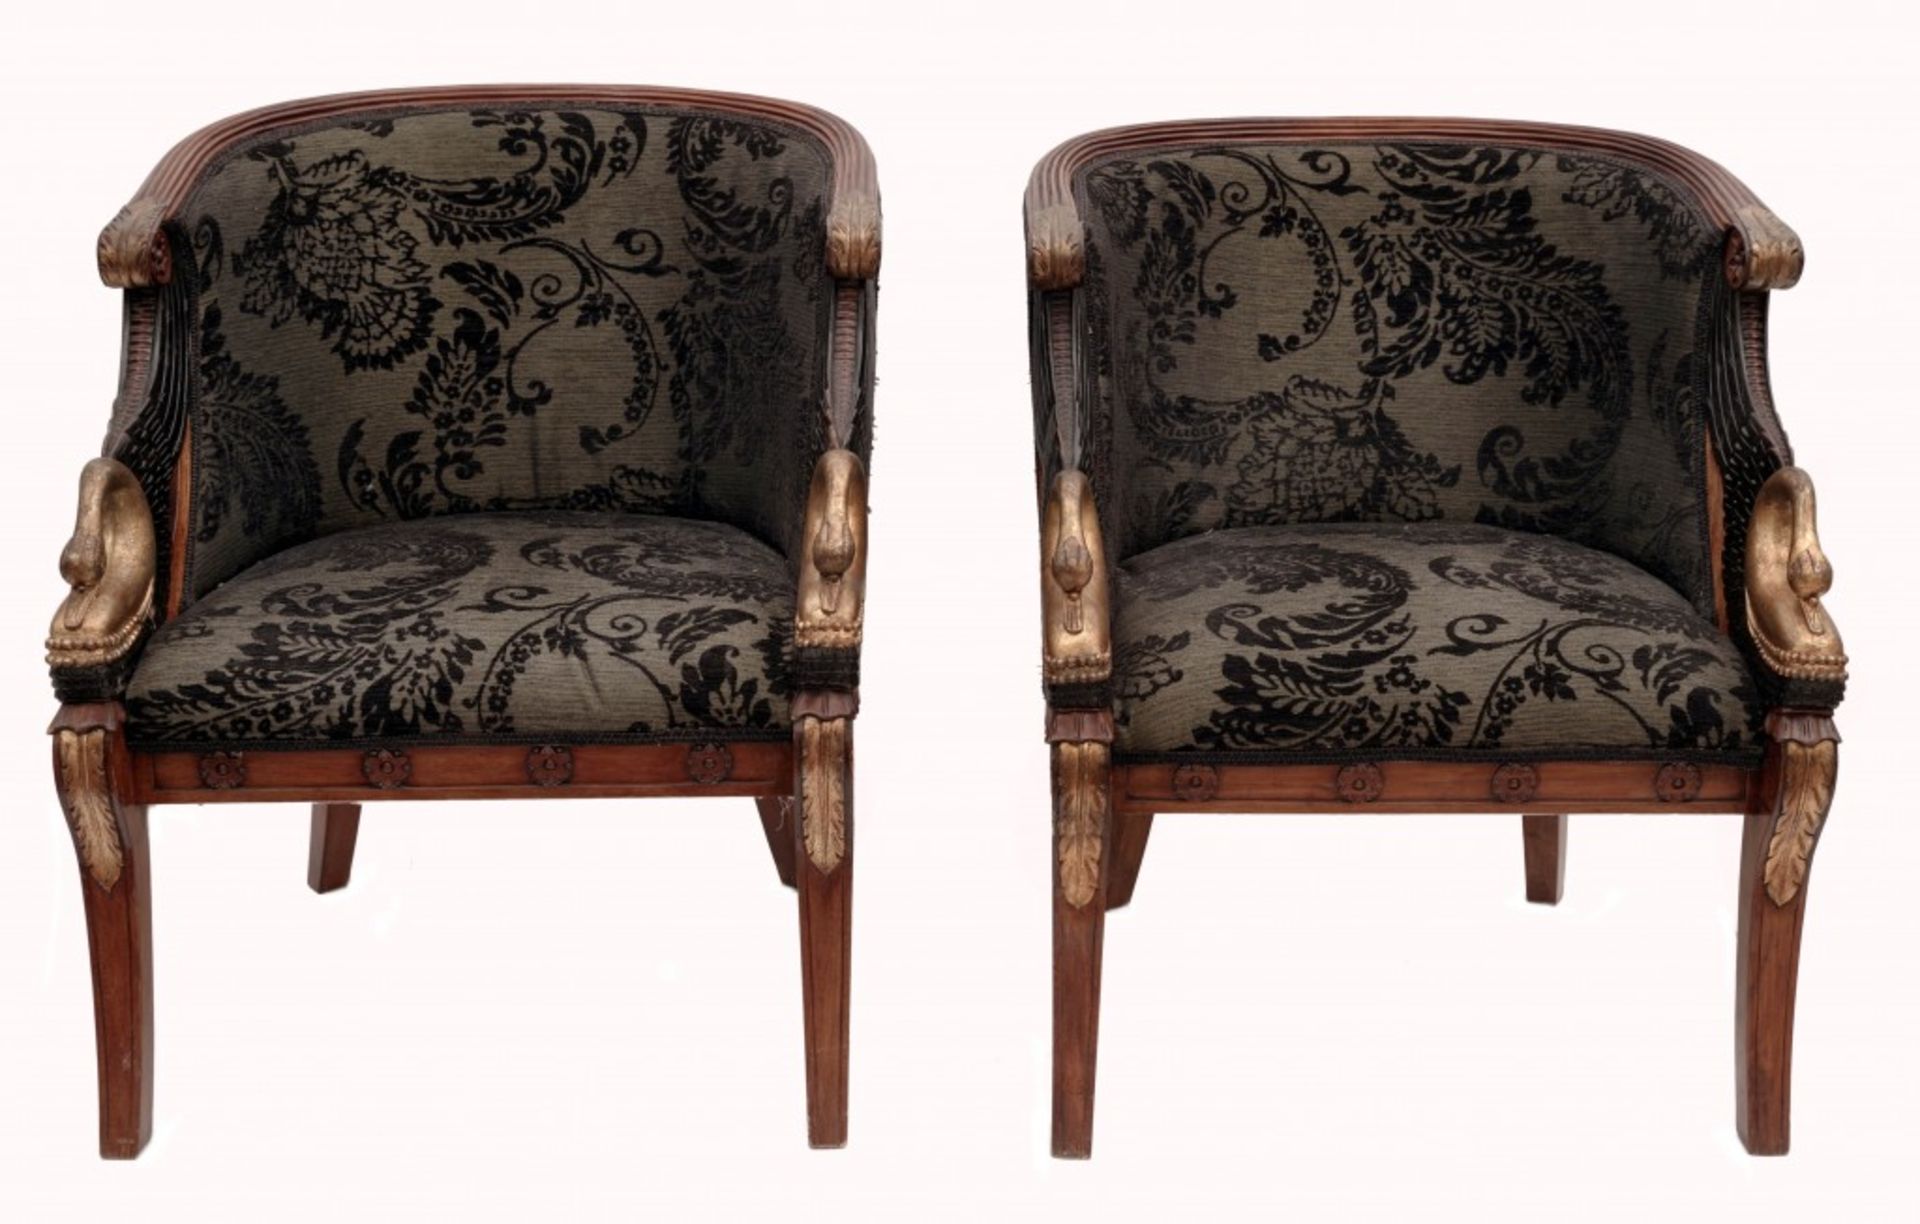 A Pair of Empire Style Barrel Chairs